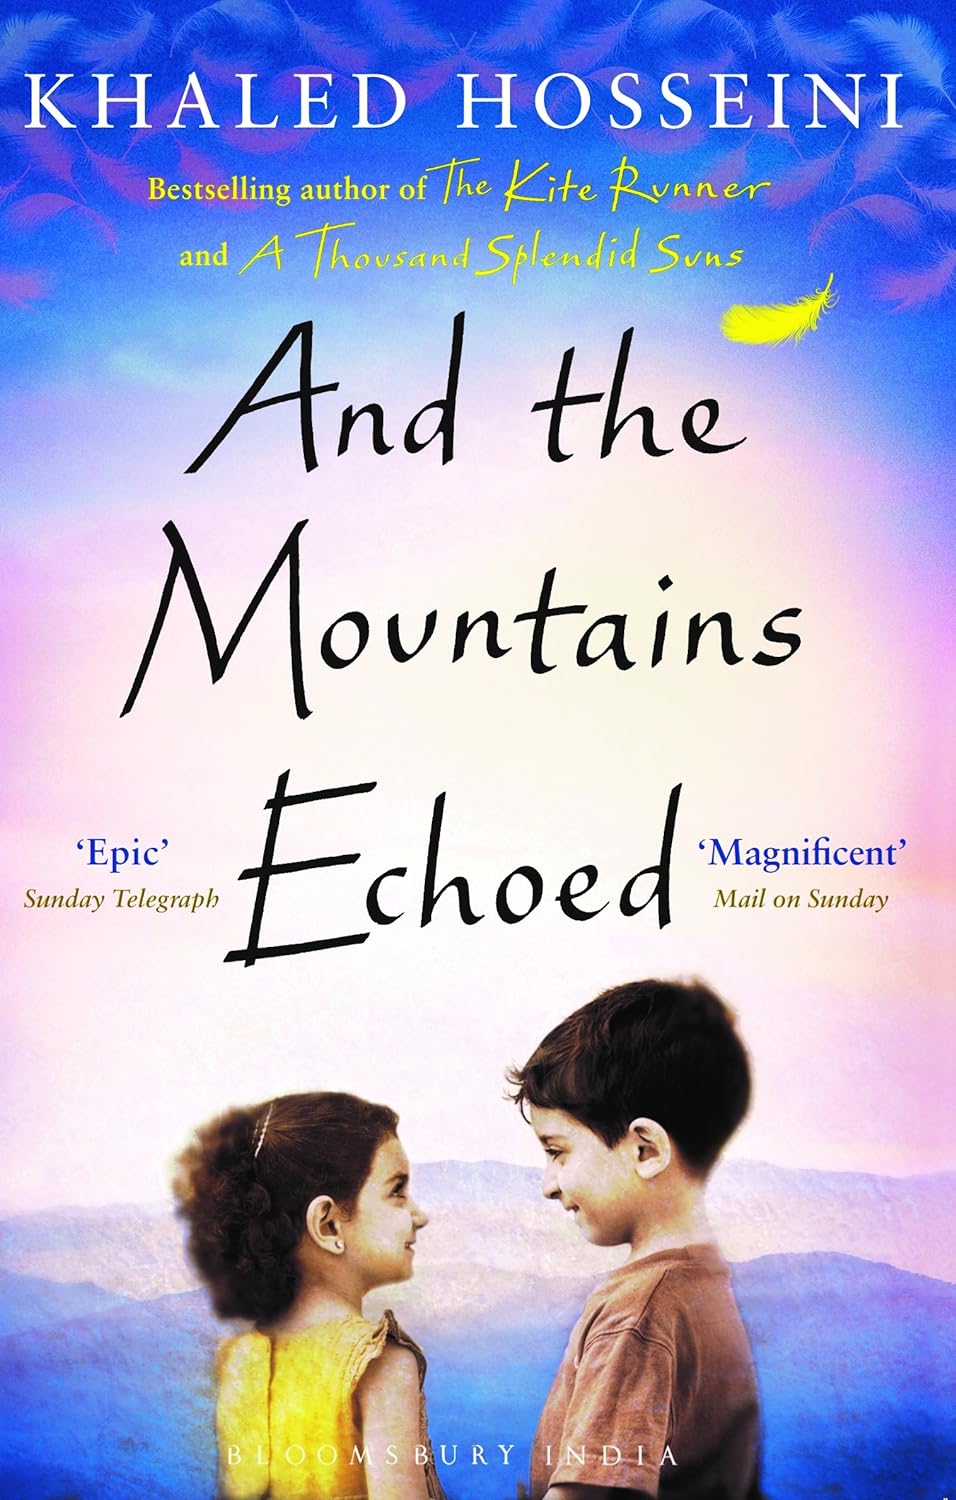 And the Mountains Echoed by Khaled Hosseni